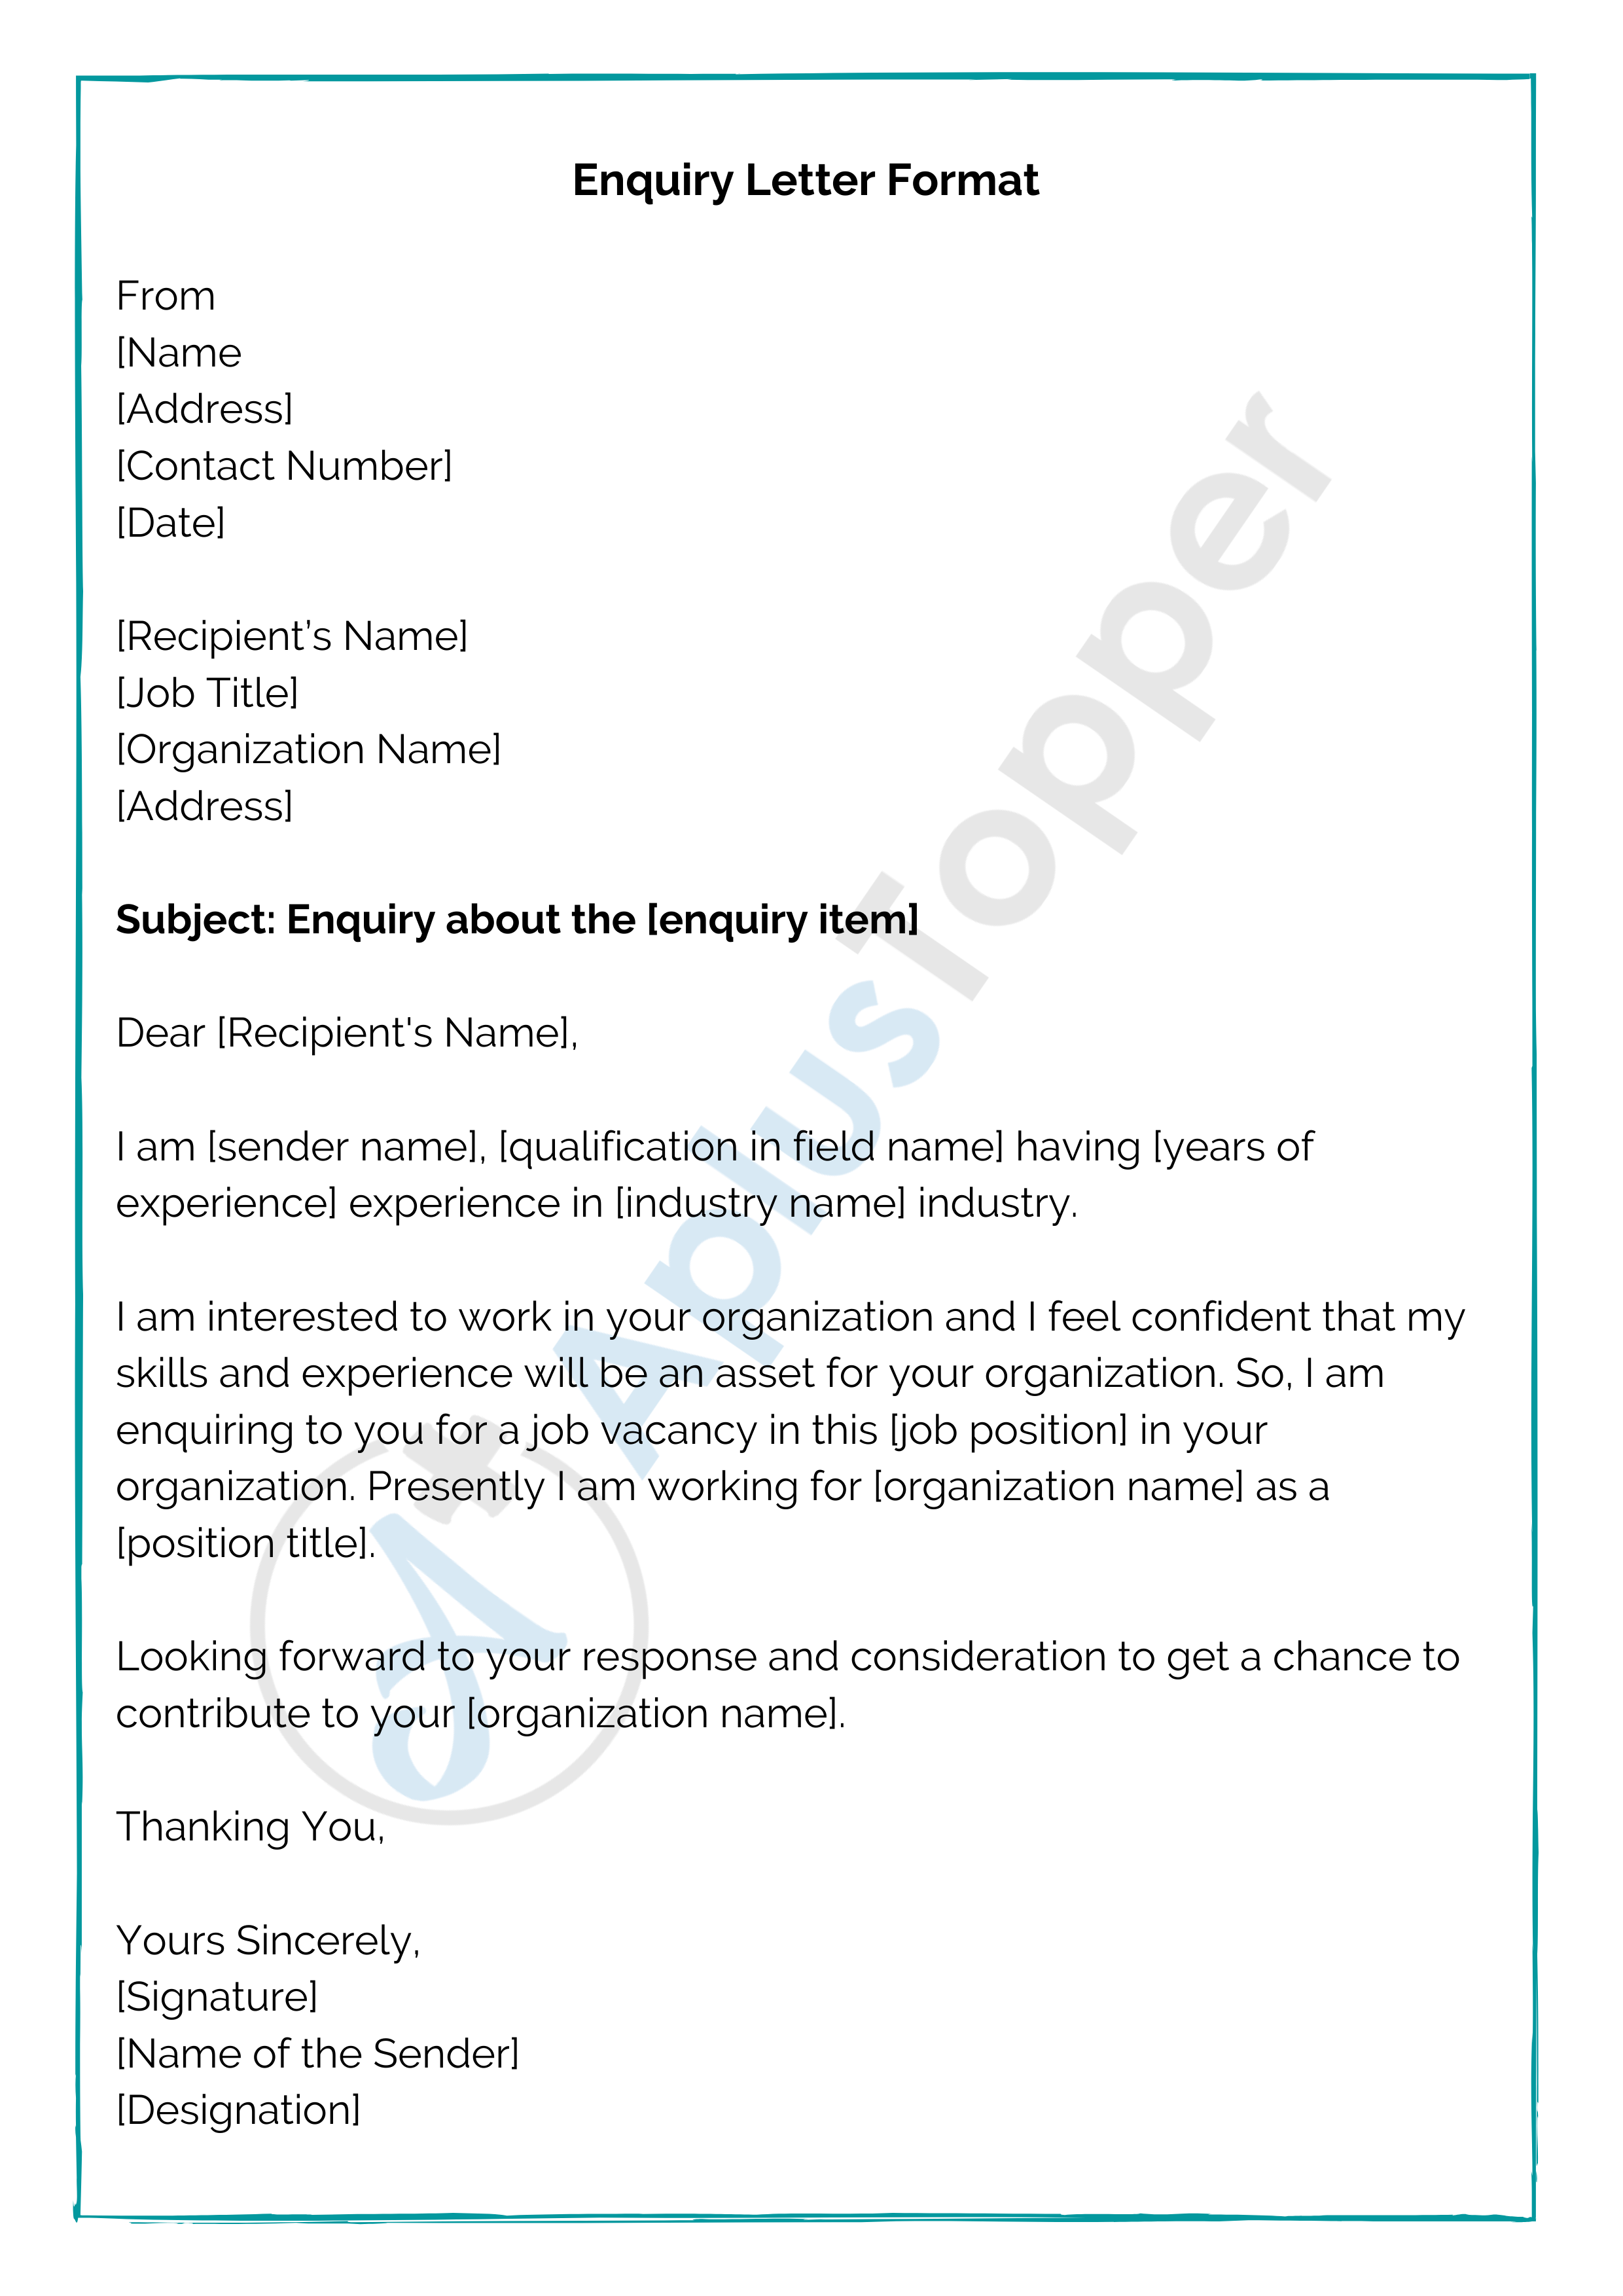 Enquiry Letter | Format, Sample and How To Write An ...